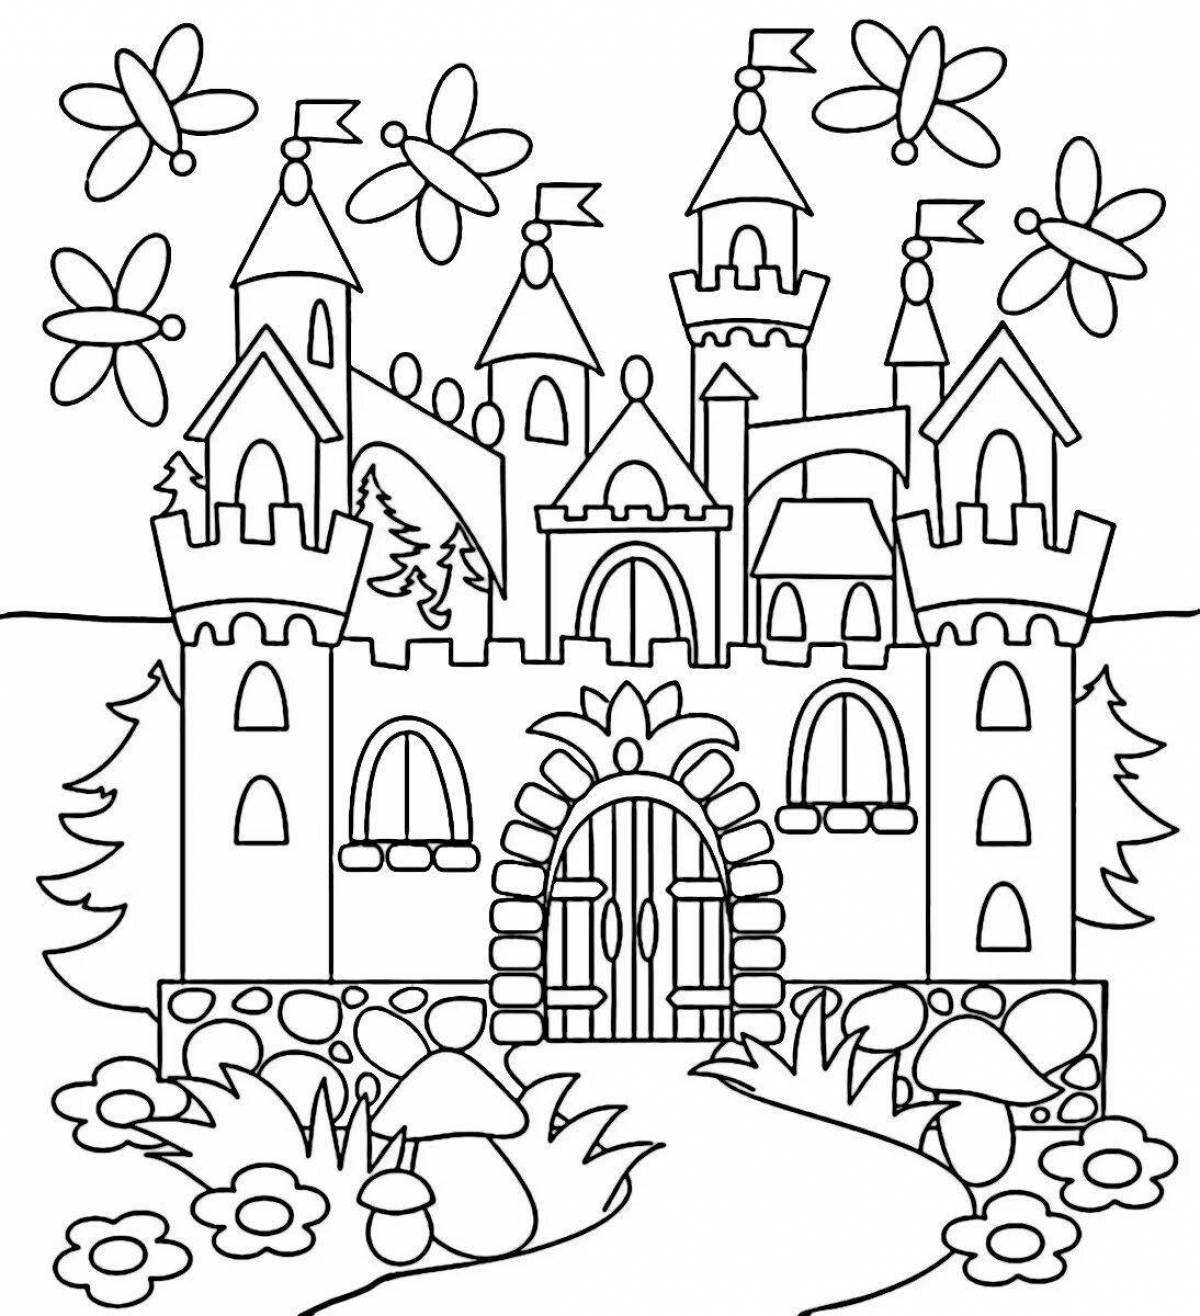 Amazing fairytale palace coloring book